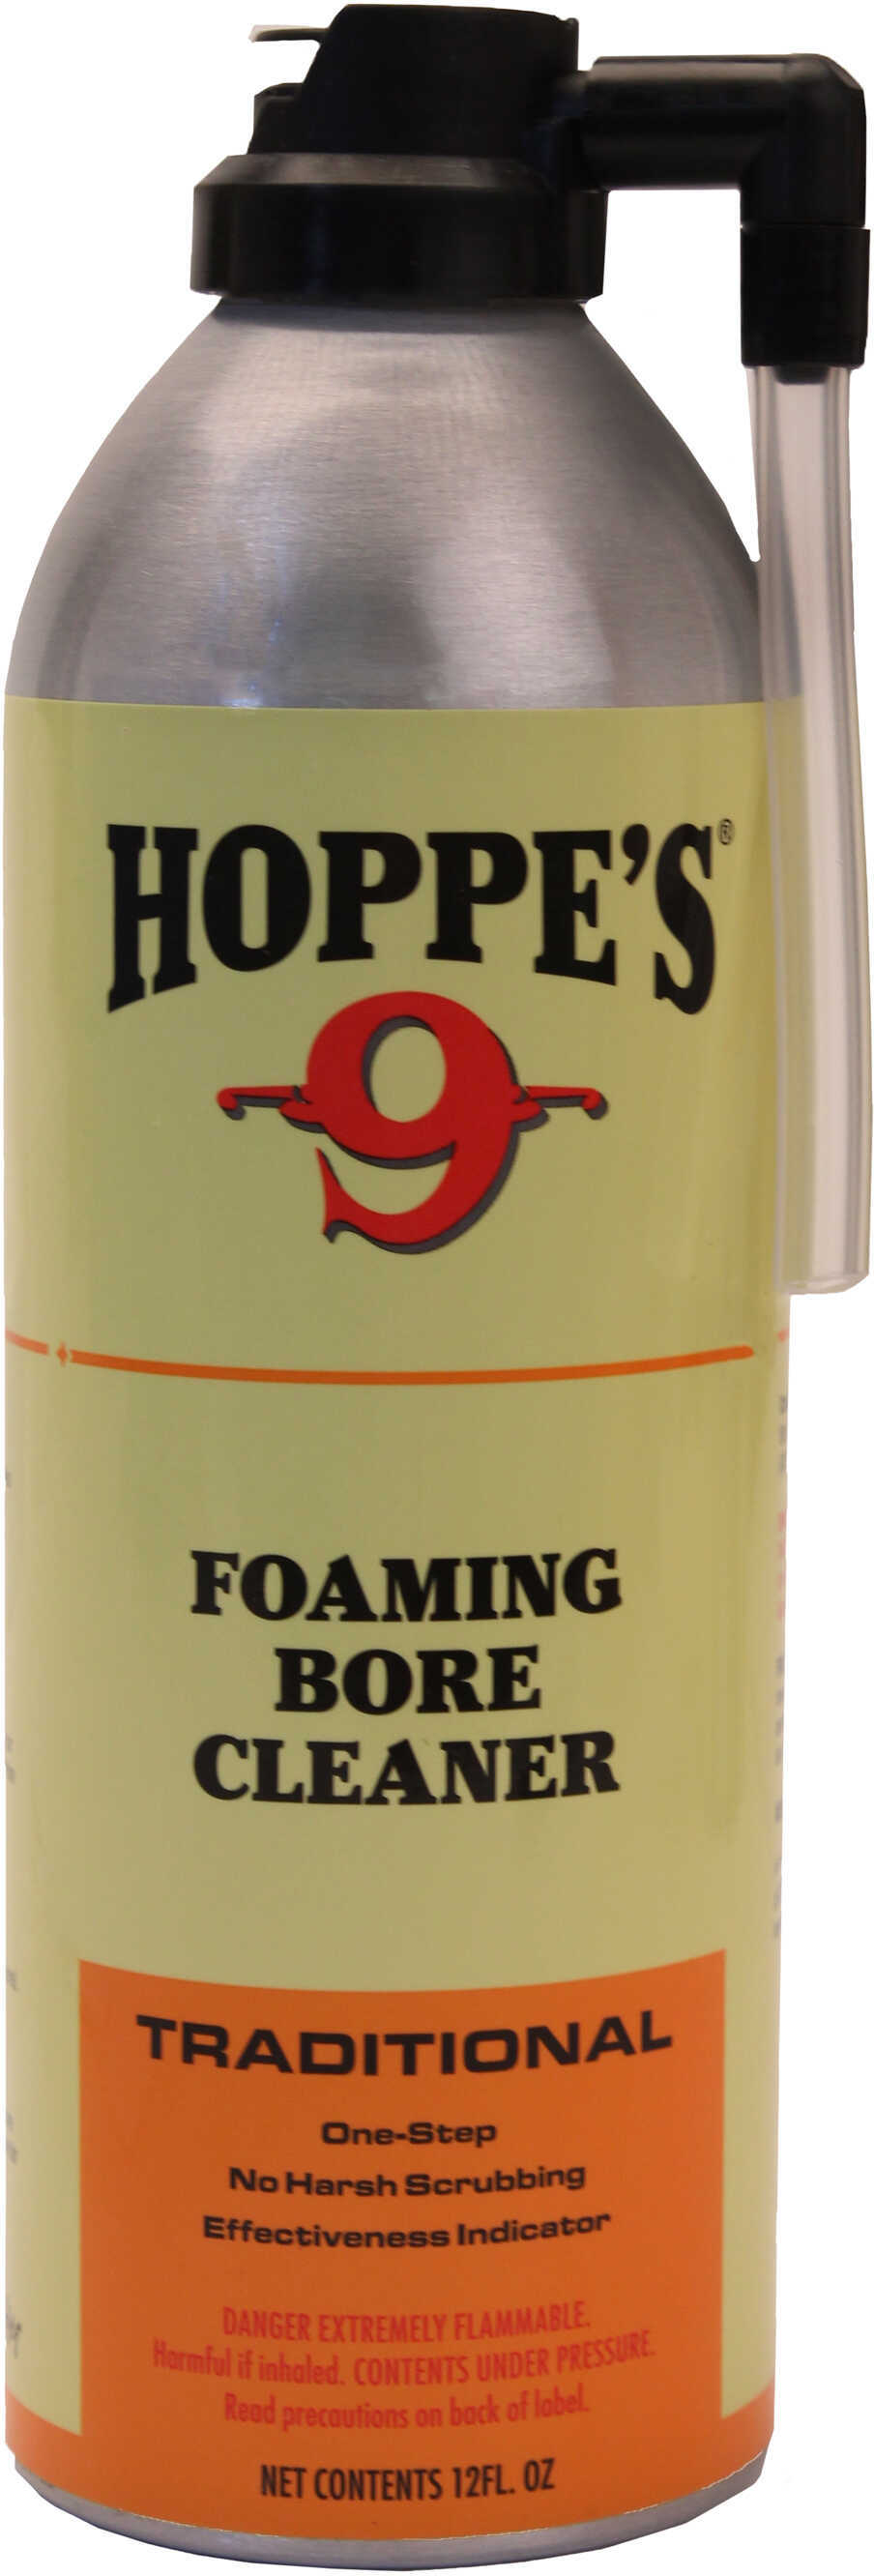 Foaming Bore Cleaner 12 oz Md: 908 Hoppe's